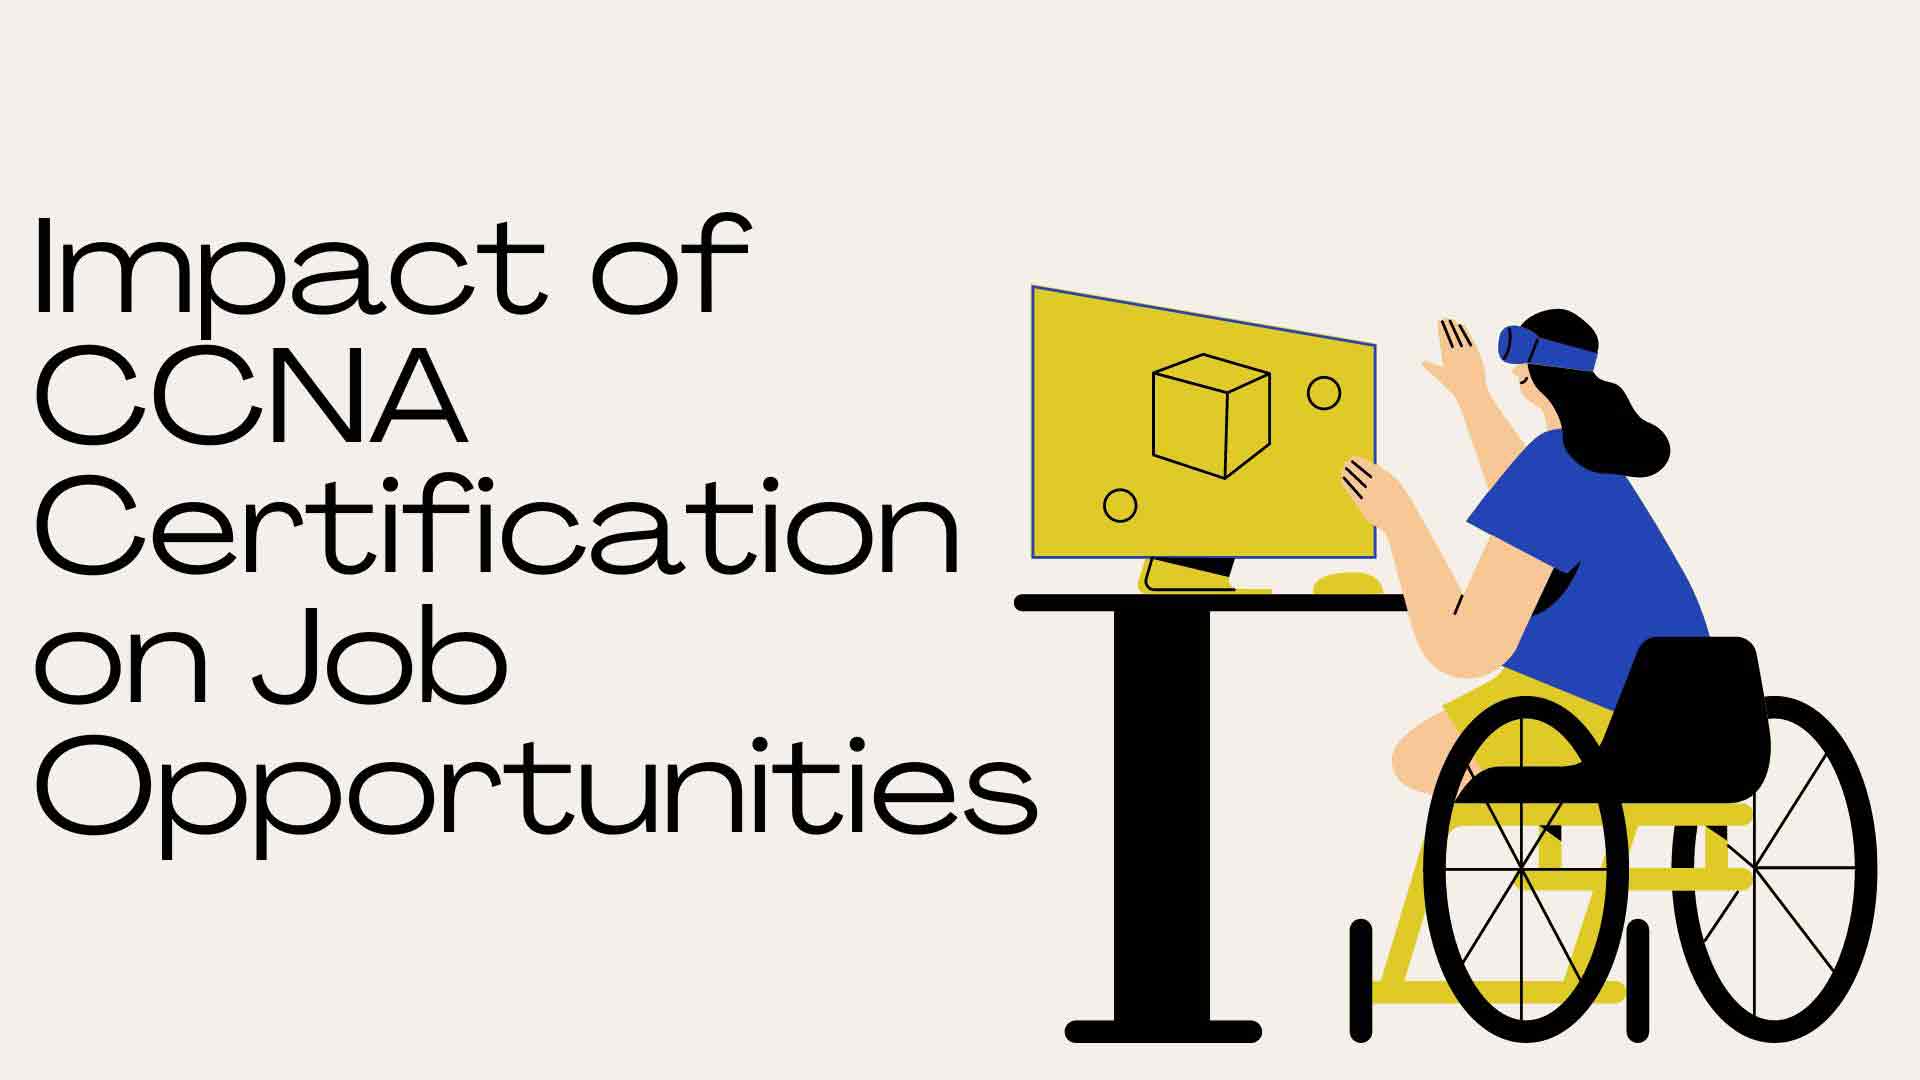 Impact of CCNA Certification on Job Opportunities